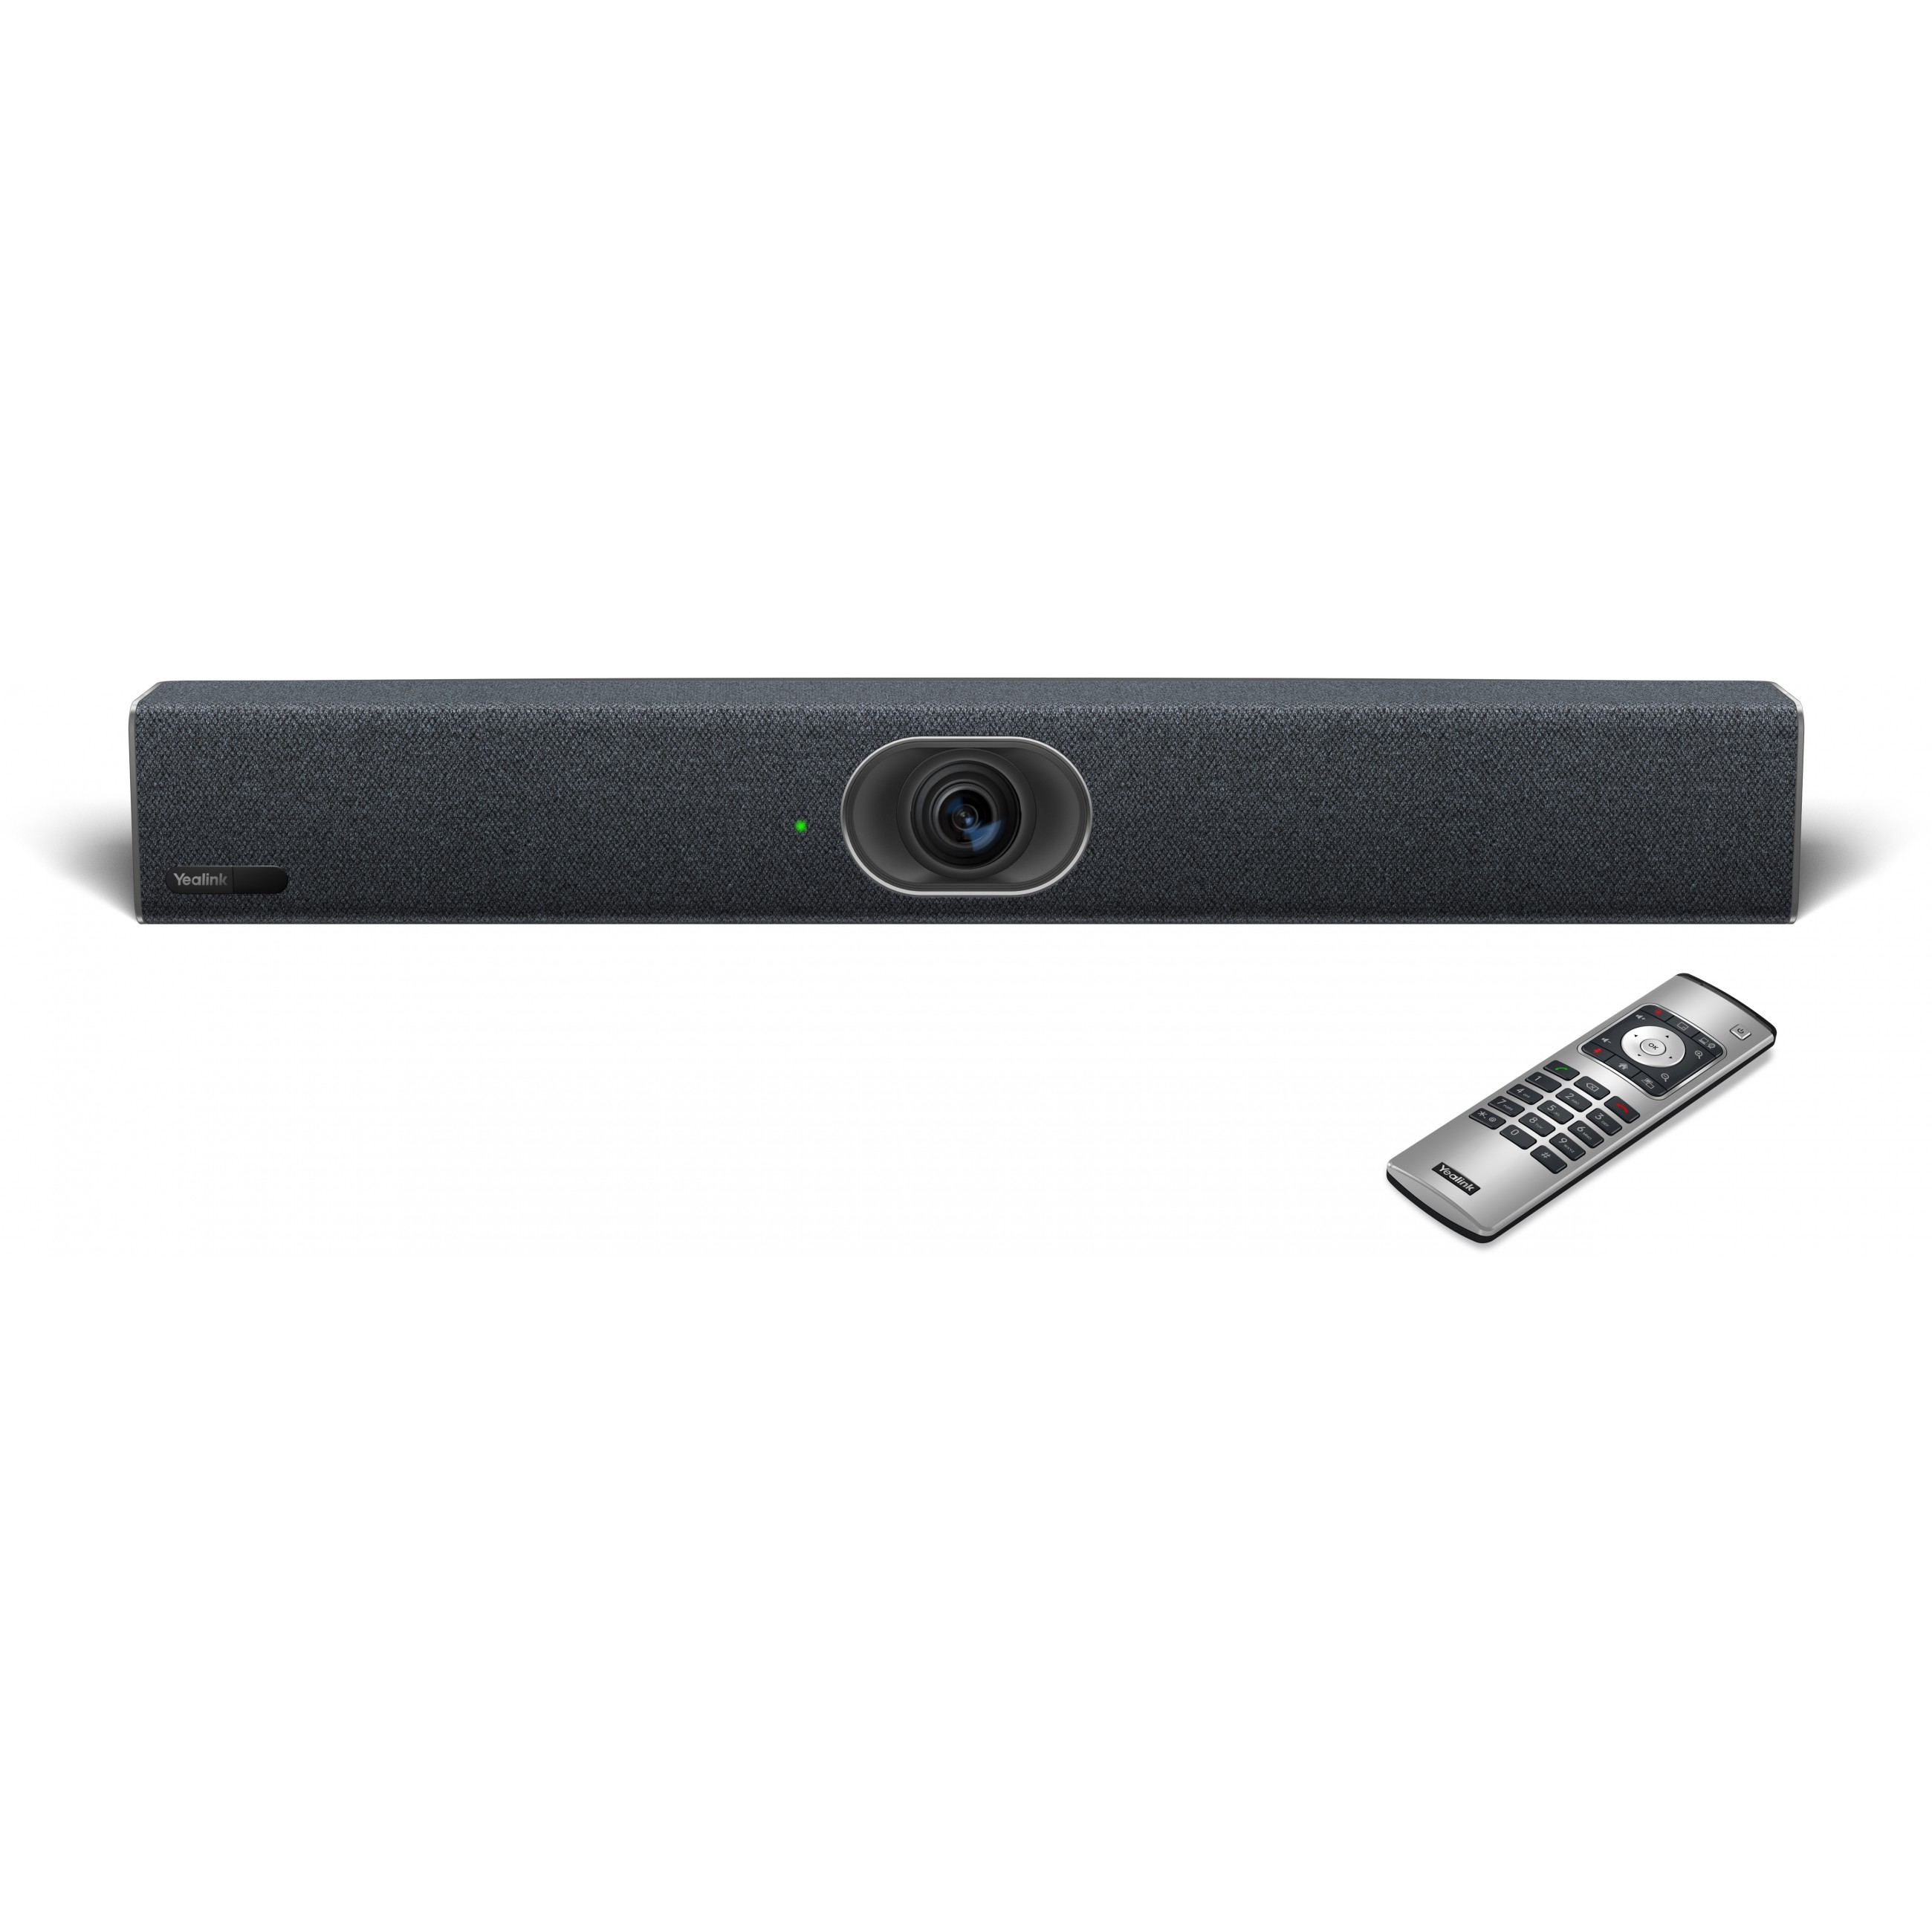 Yealink A20-010 video conferencing system